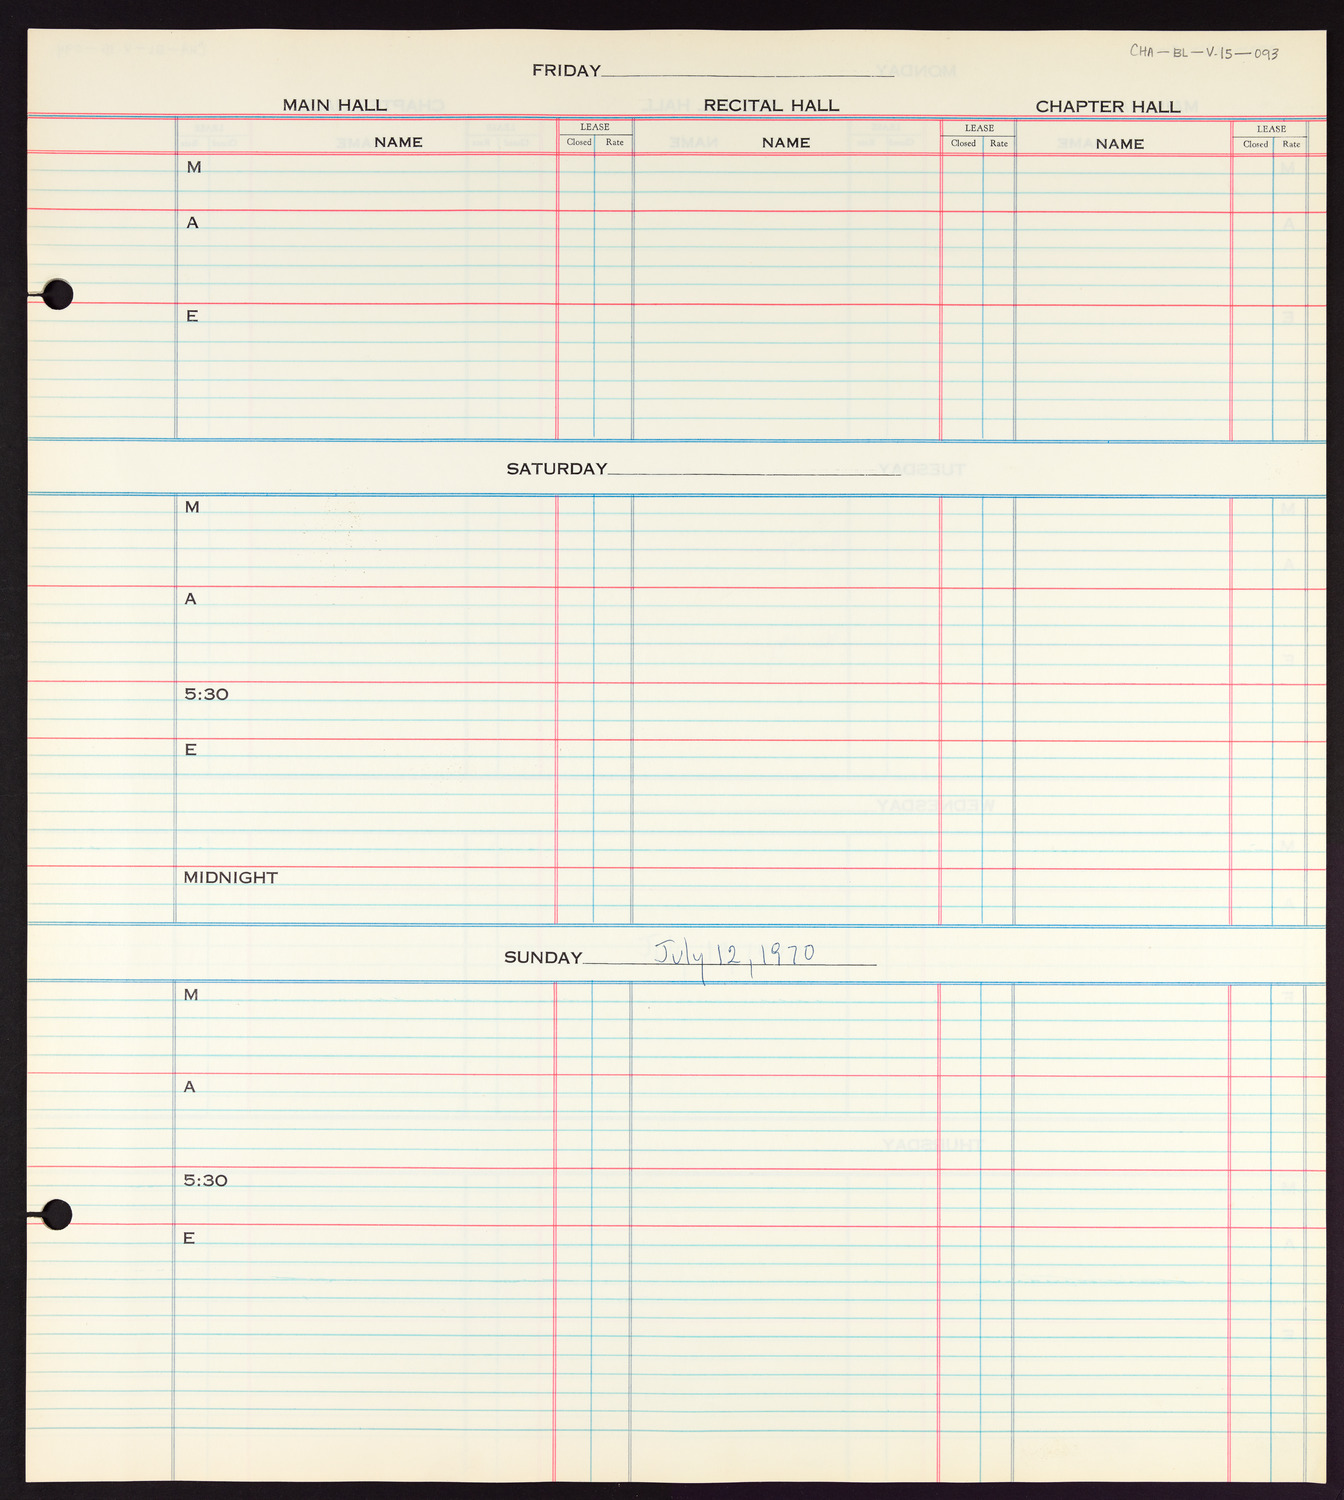 Carnegie Hall Booking Ledger, volume 15, page 93